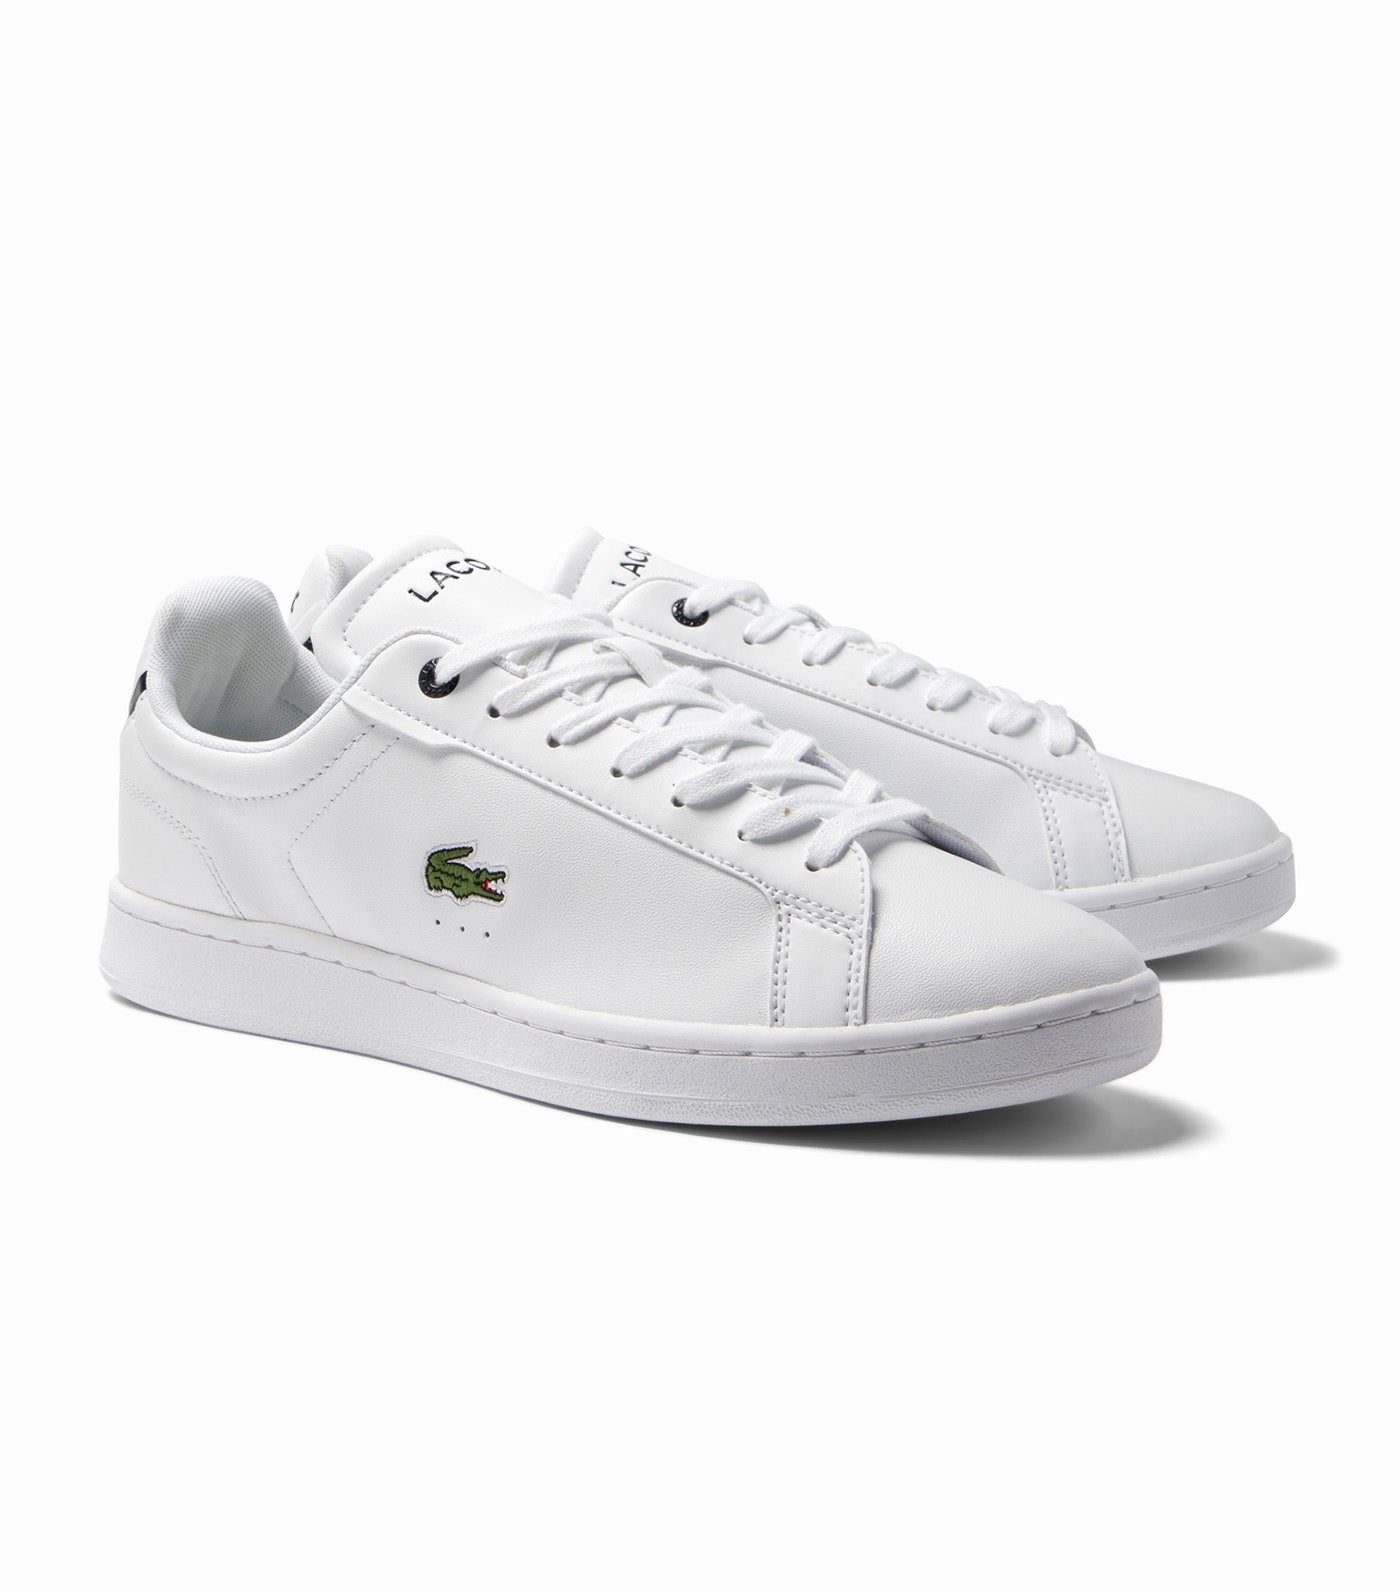 Men's Lacoste Carnaby Pro BL Leather Tonal Sneakers White/Navy